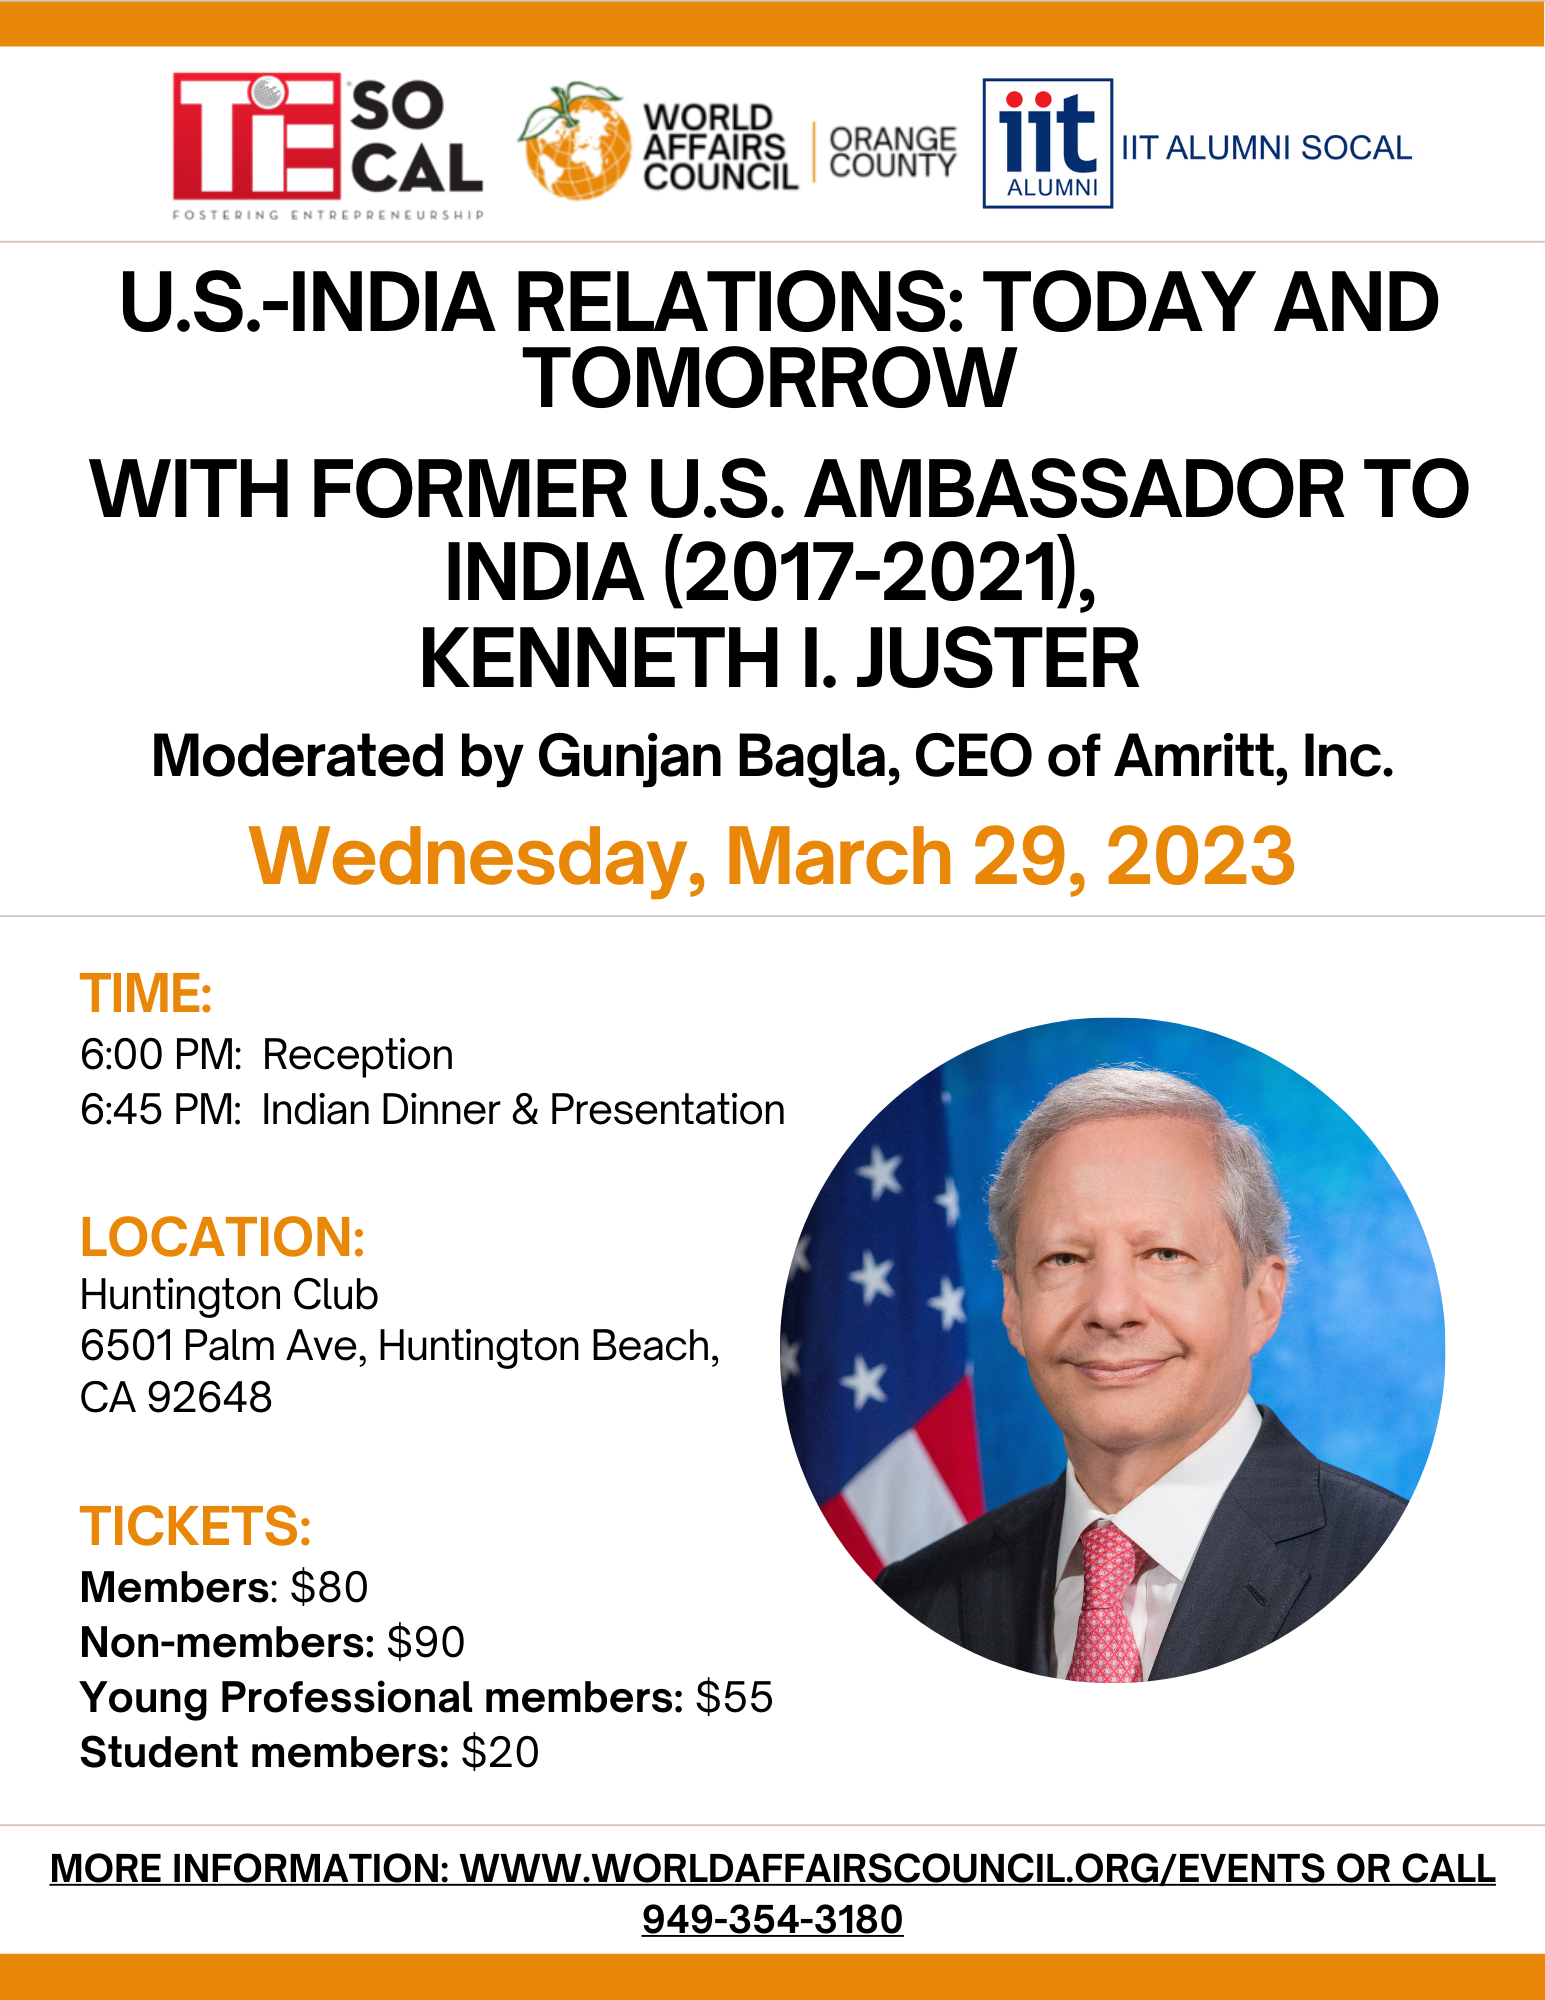 U.S.-India Relations: Today & Tomorrow featuring Former Ambassador to India (2017-2021), Kenneth I. Juster